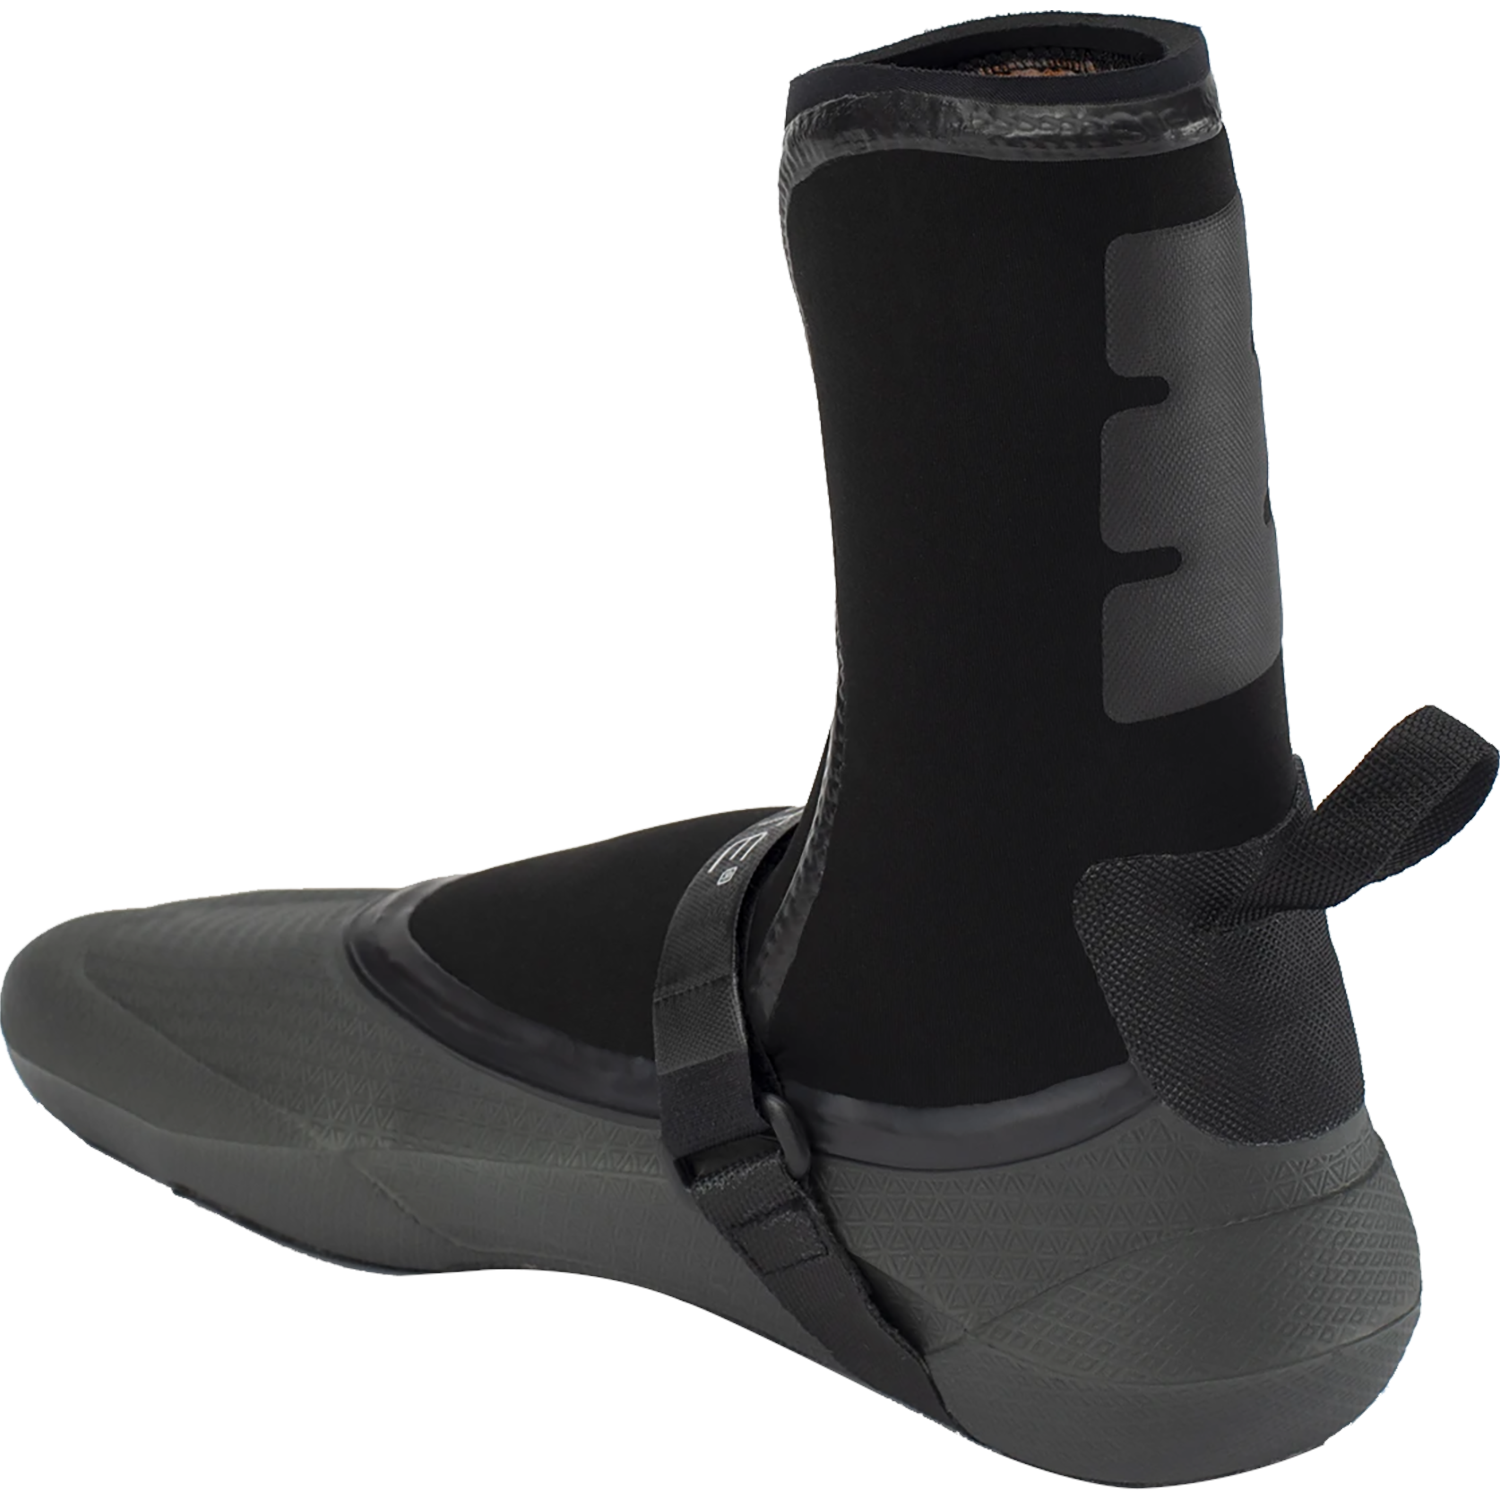 Sporting Goods Solite 5mm Custom Pro Surf Gear Wetsuit Boots Grey/black ...